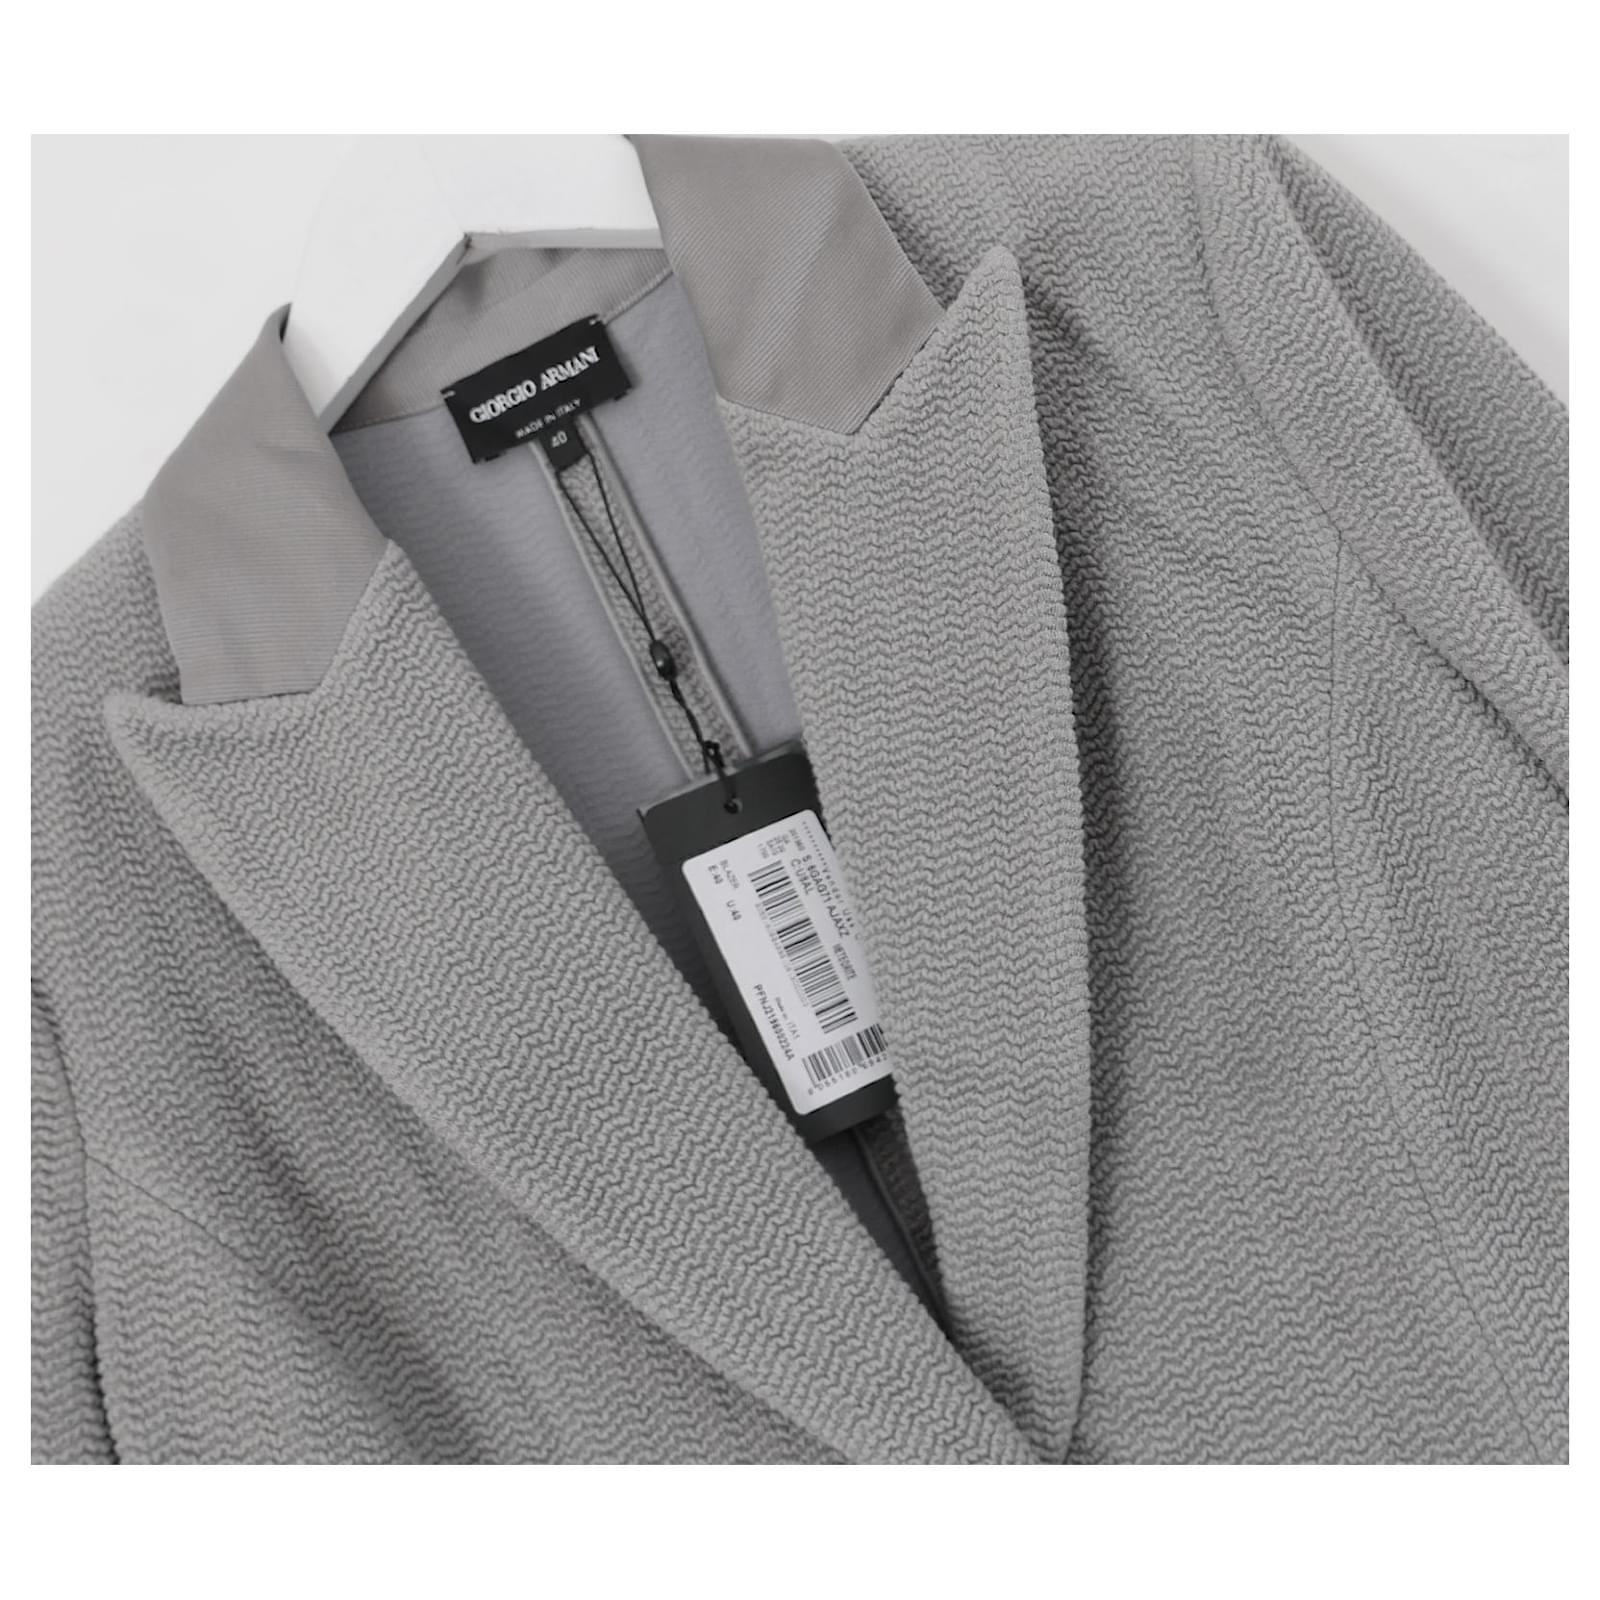 Gorgeous Giorgio Armani blazer jacket.bought for £1600 and new with tags/authenticity card. Made from crinkle textured viscose mix with grosgrain satin trims. Superbly tailored with padded shoulders, slight peplum hem, winged lapels and single